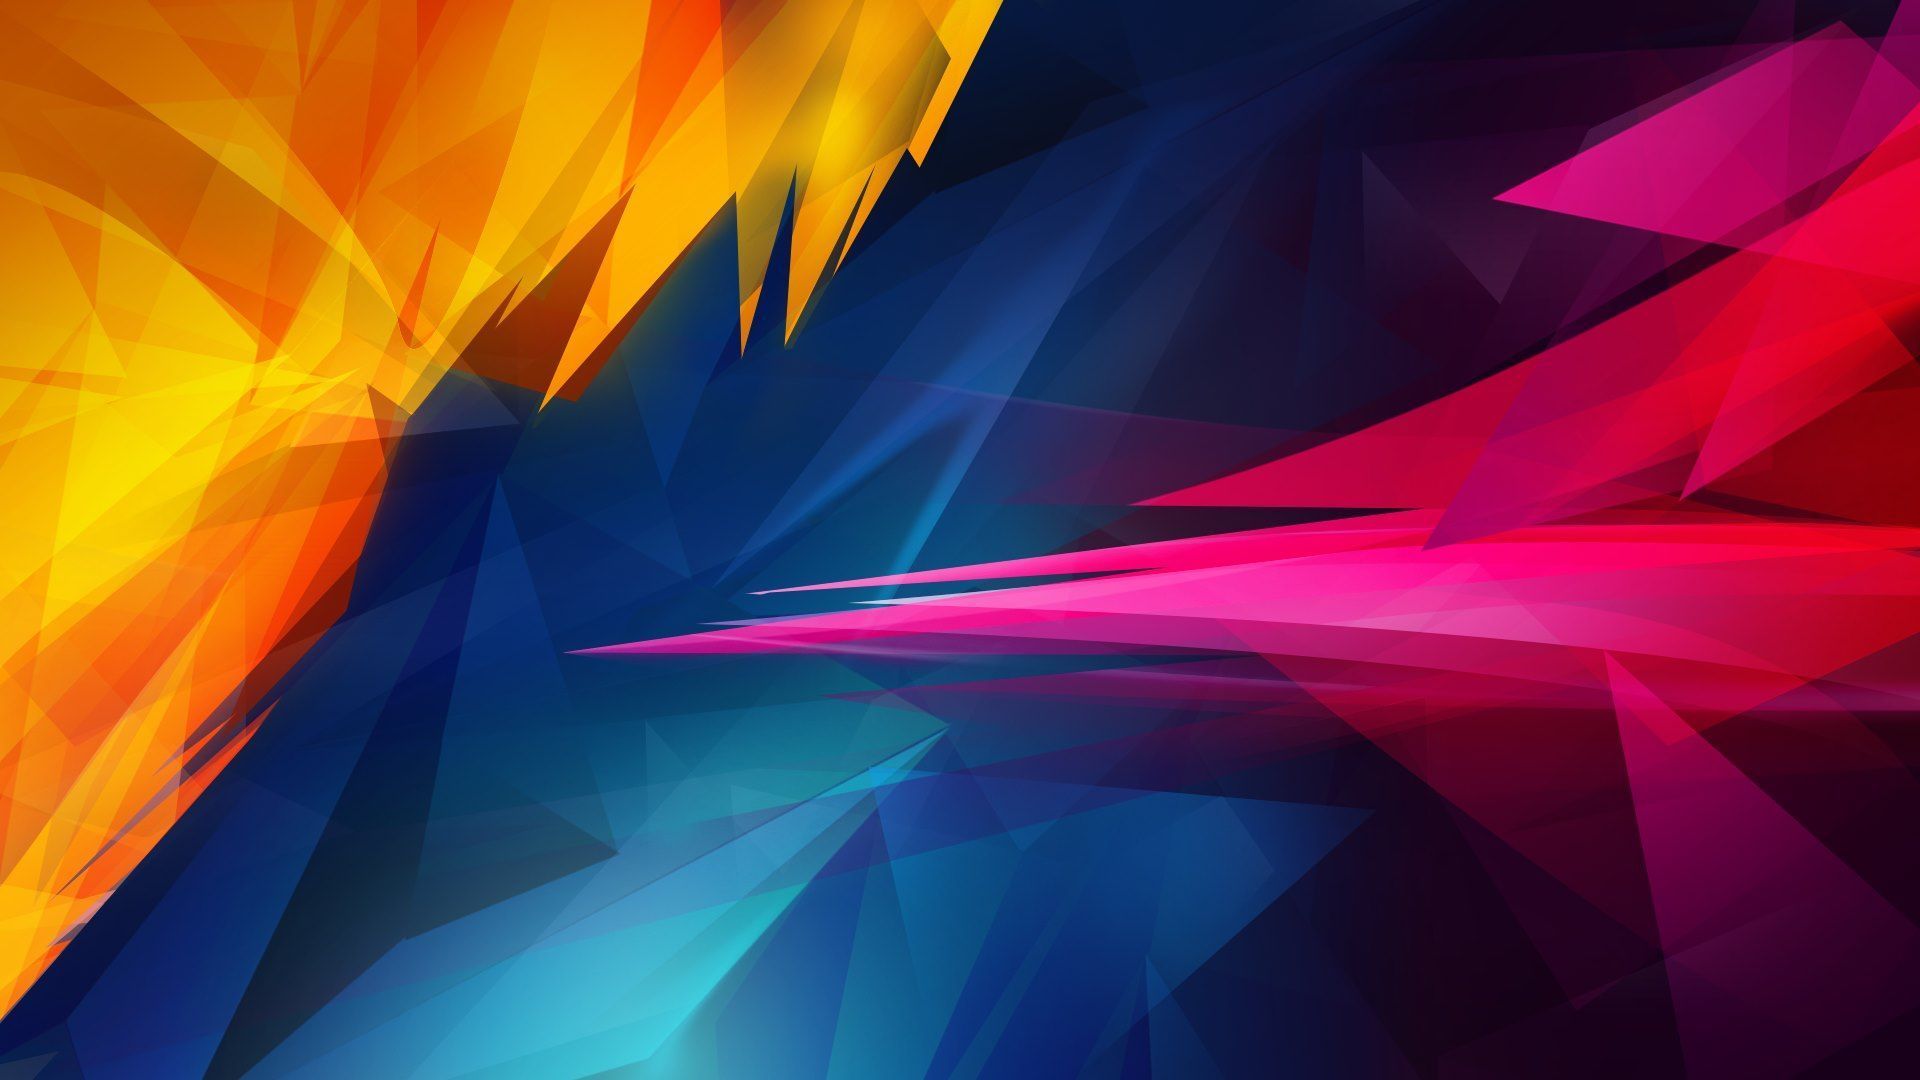 Abstract Sharp Shapes uhd wallpapers - Ultra High Definition